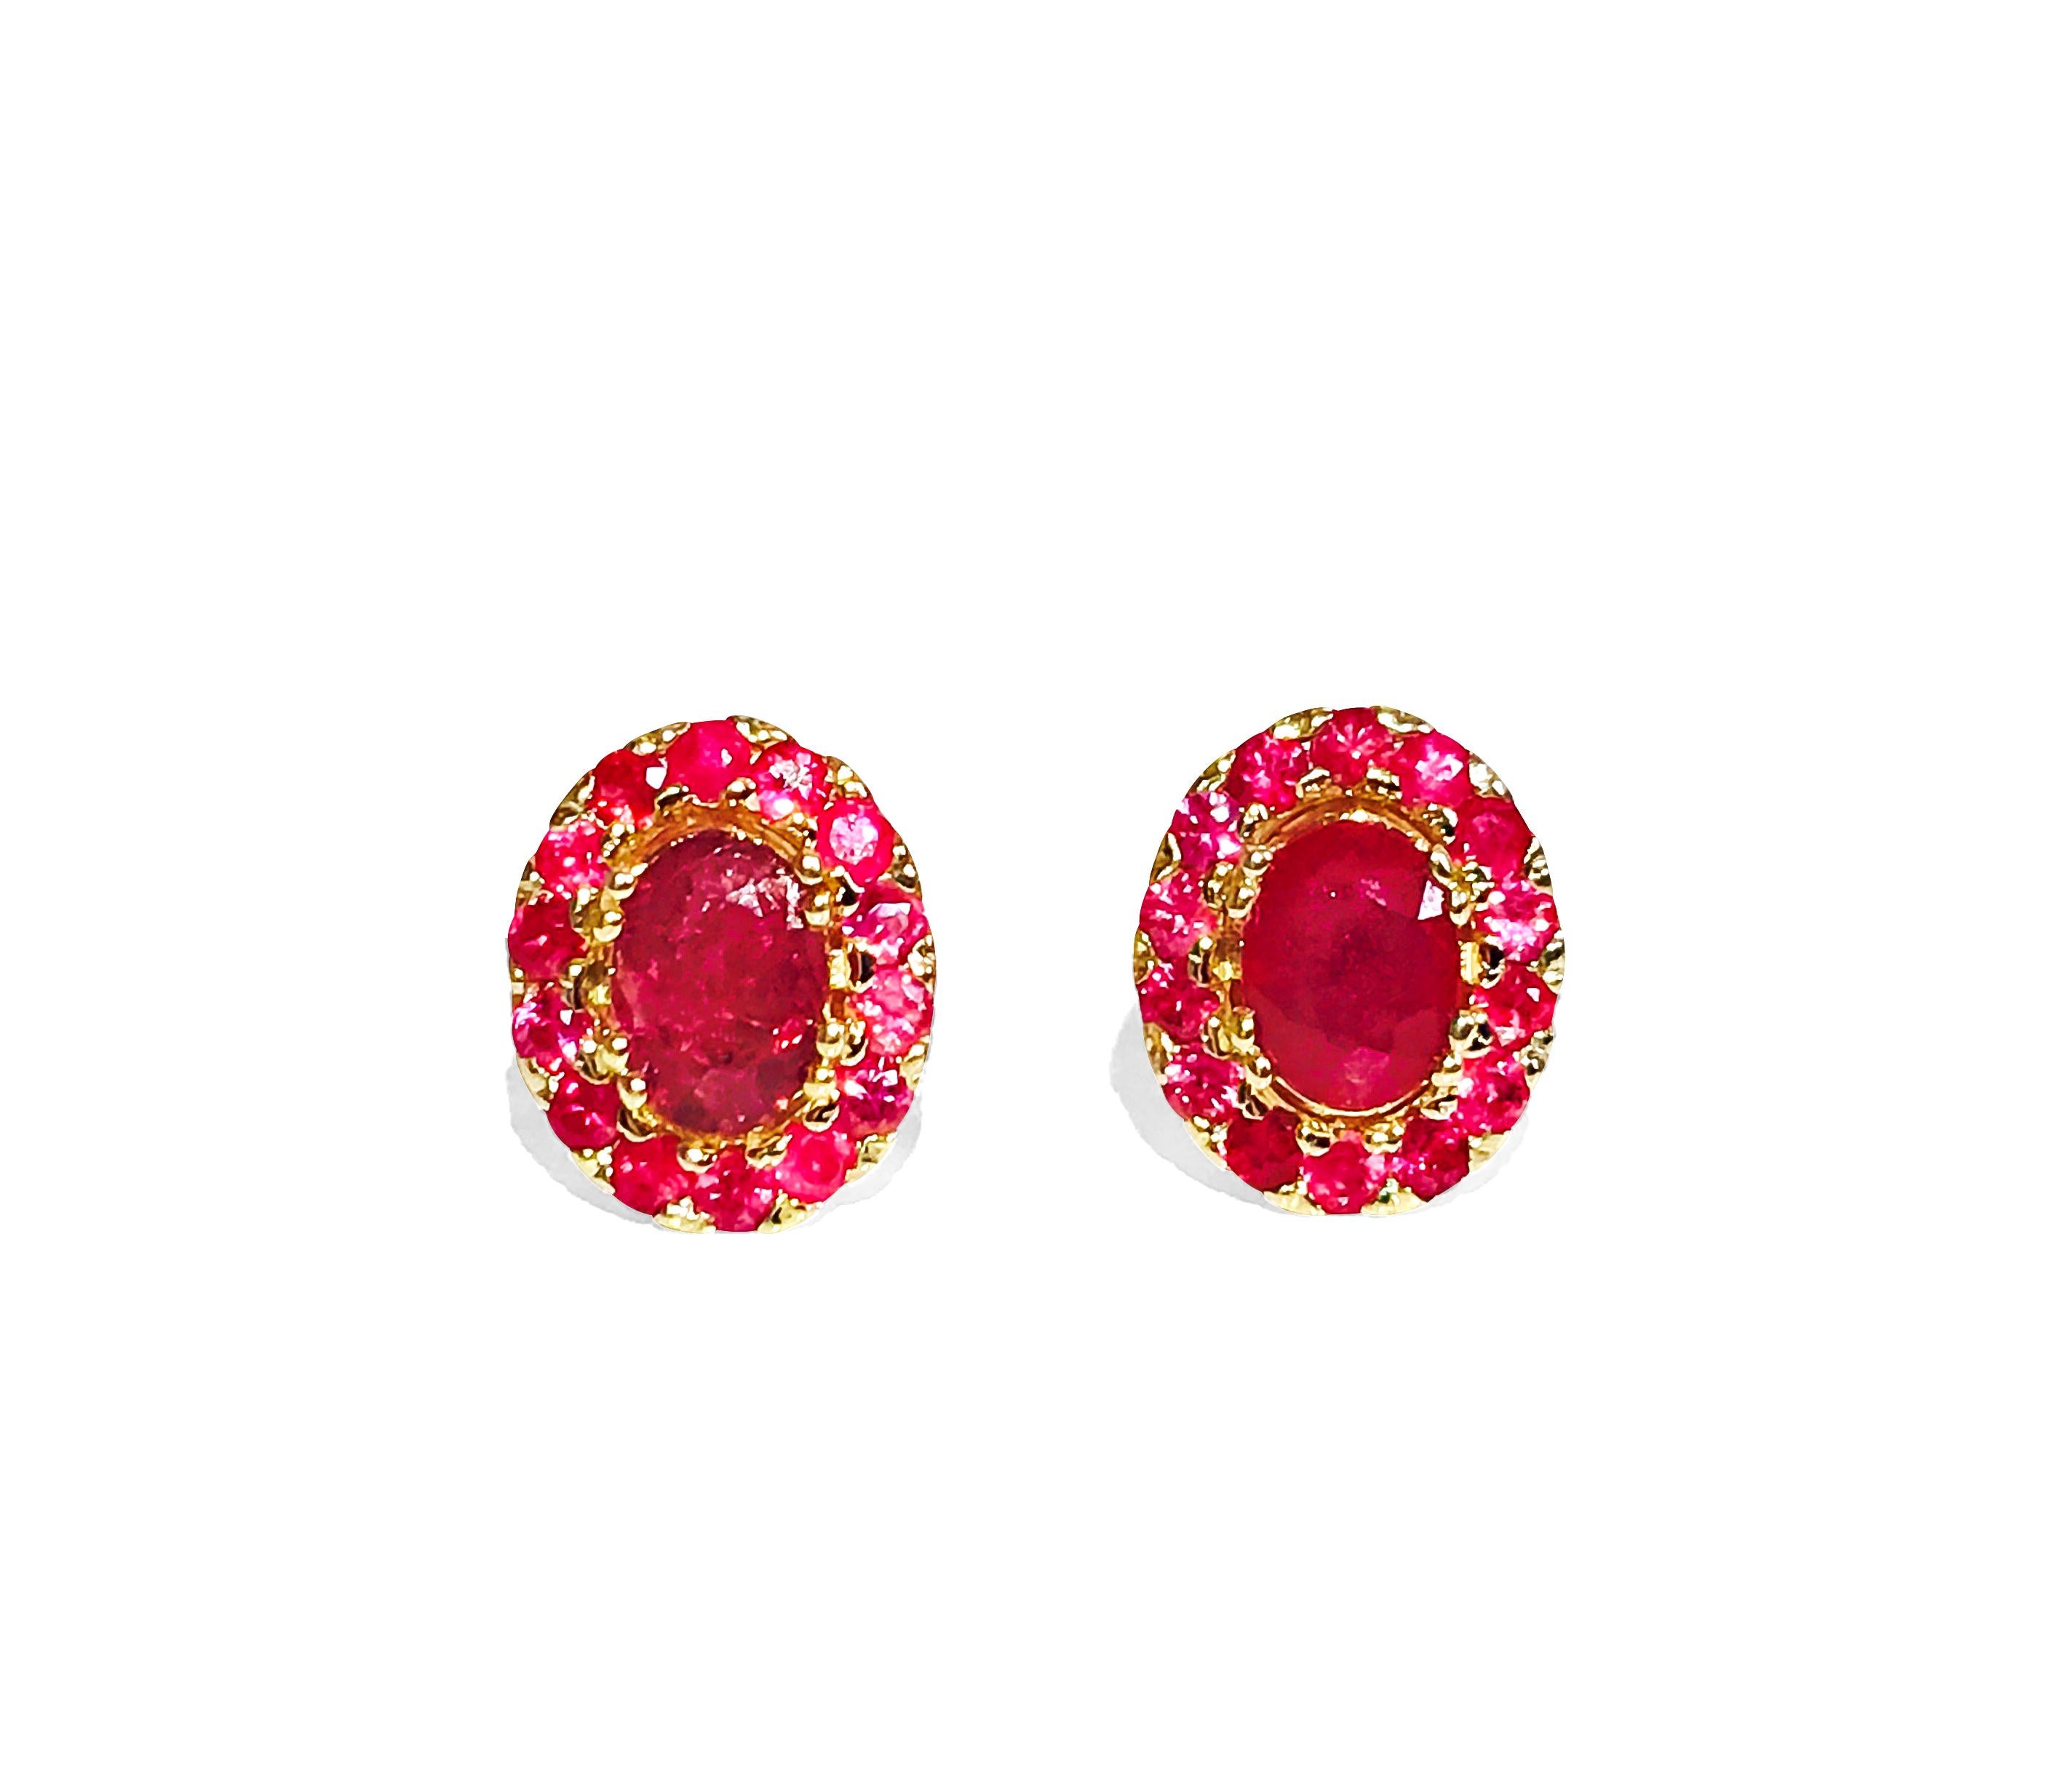 Women's 3.12ct Natural Ruby Stud Earrings 14K Gold For Sale